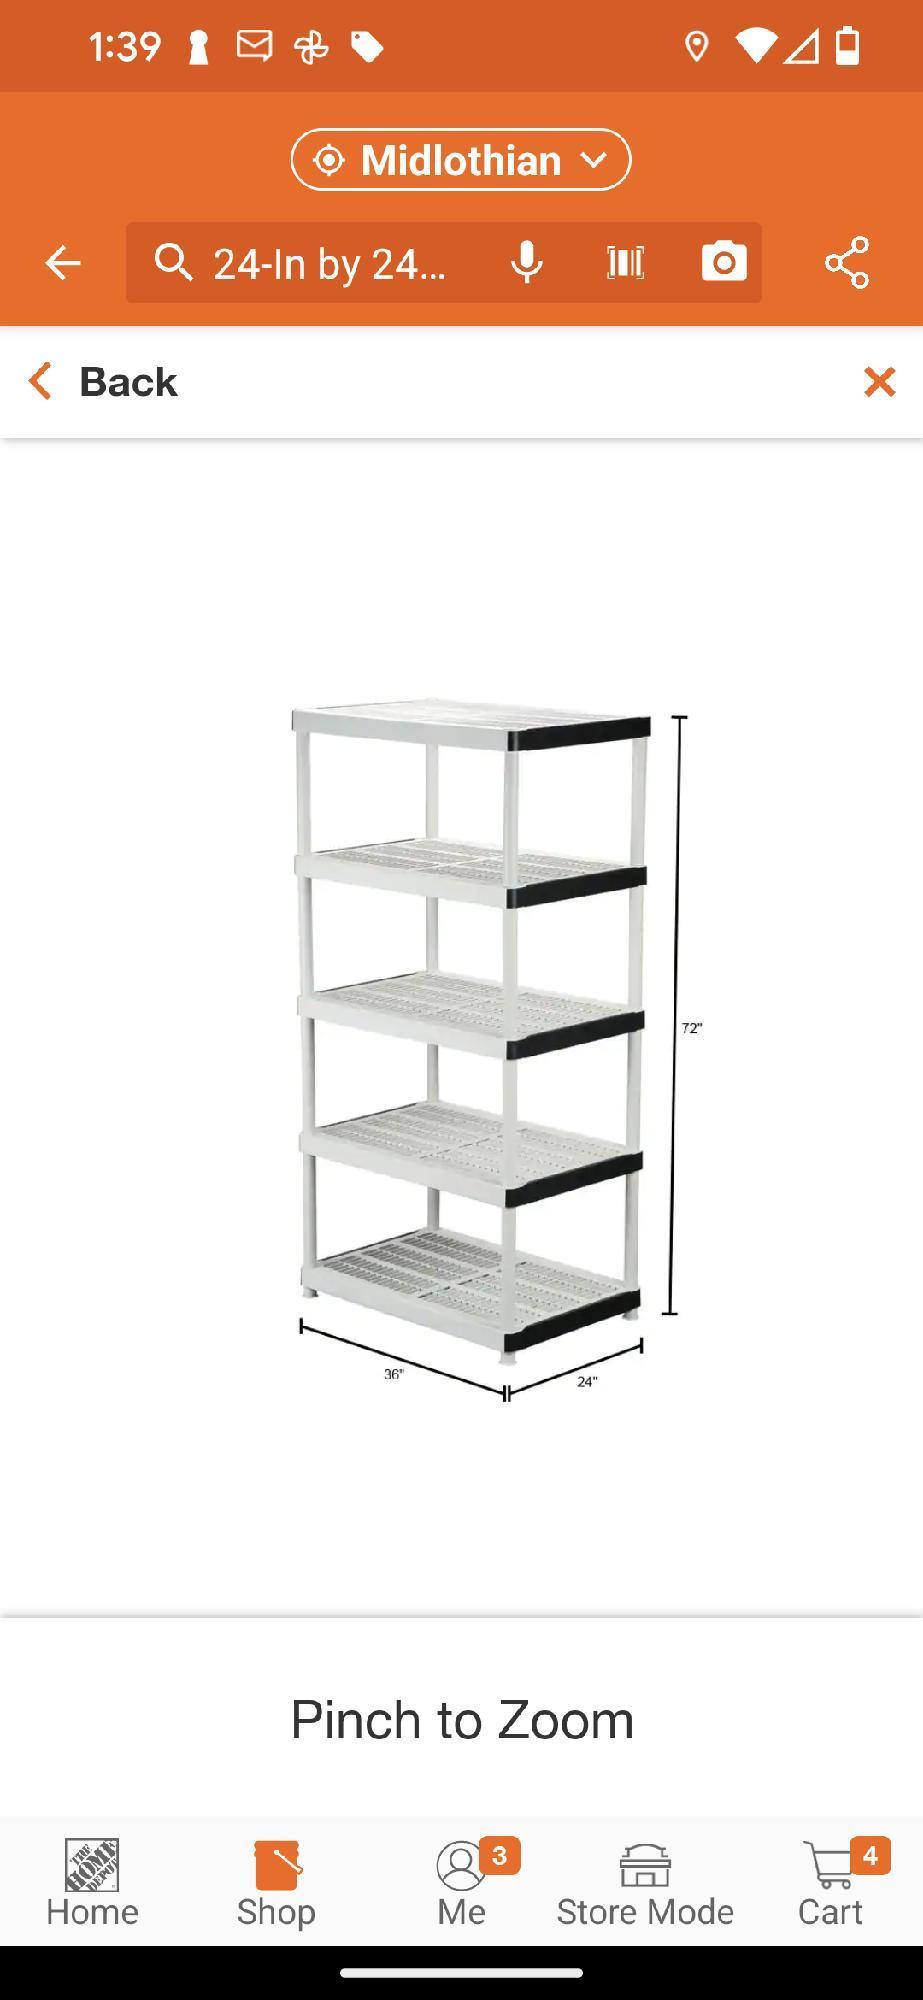 HDX 5-Tier Plastic Garage Storage Shelving Unit in Gray (36 in. W x 72 in. H x 24 in. D), Appears to